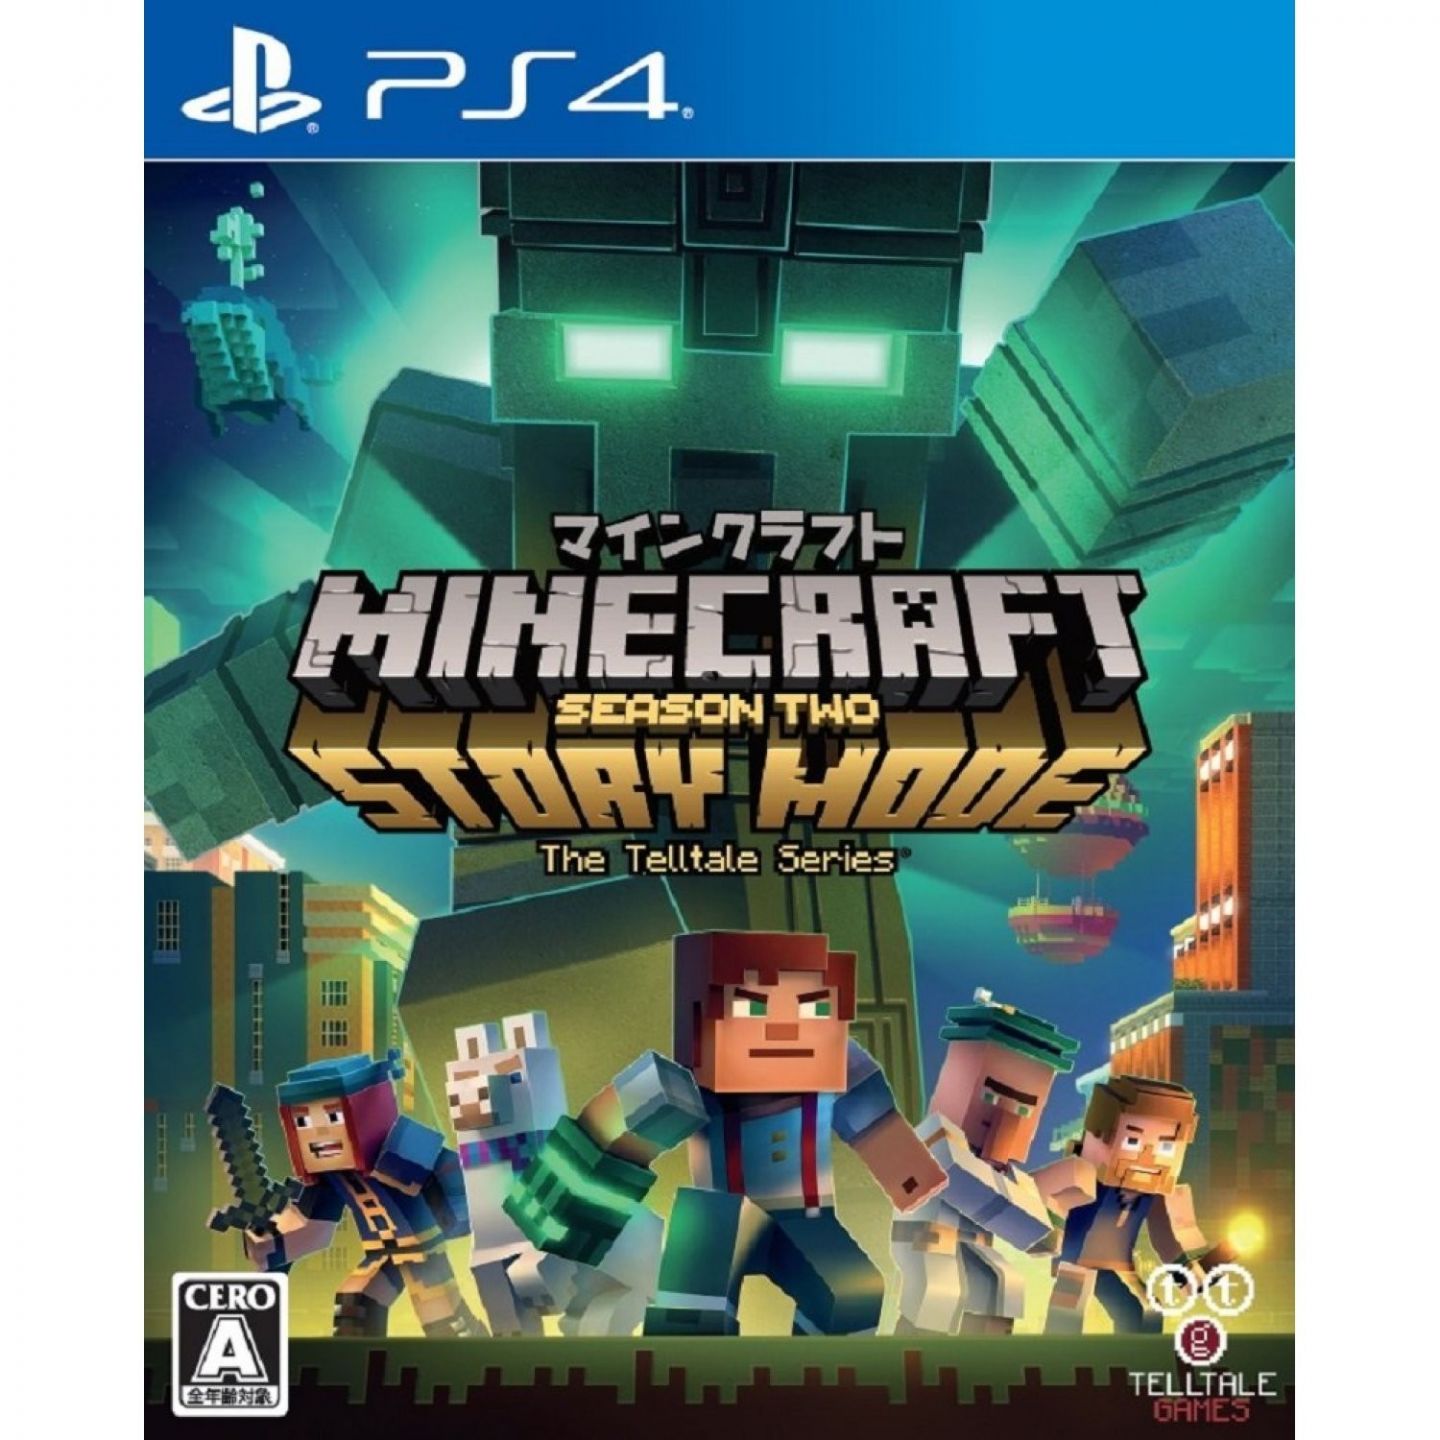 i can't install minecraft story mode on play store : r/MinecraftStoryMode